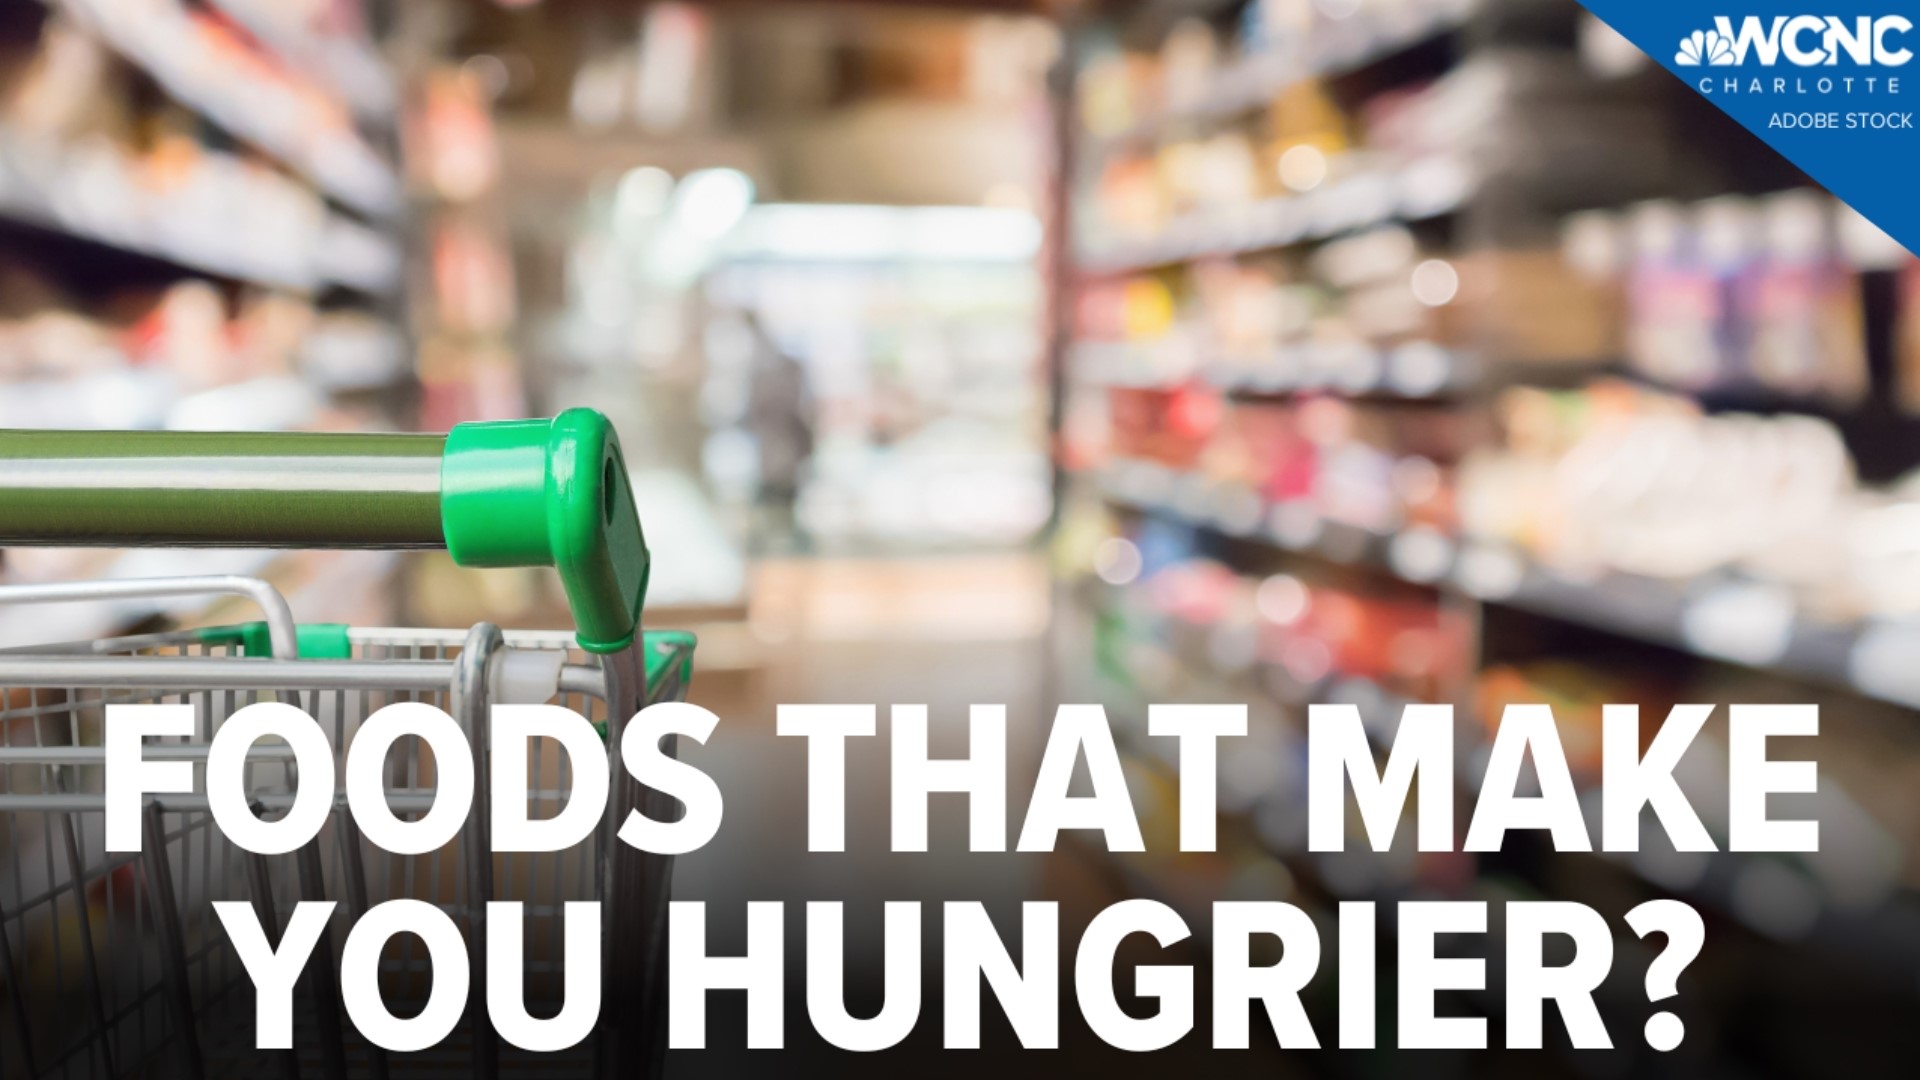 According to a Harvard nutritionist, four common food additives actually make you hungrier.